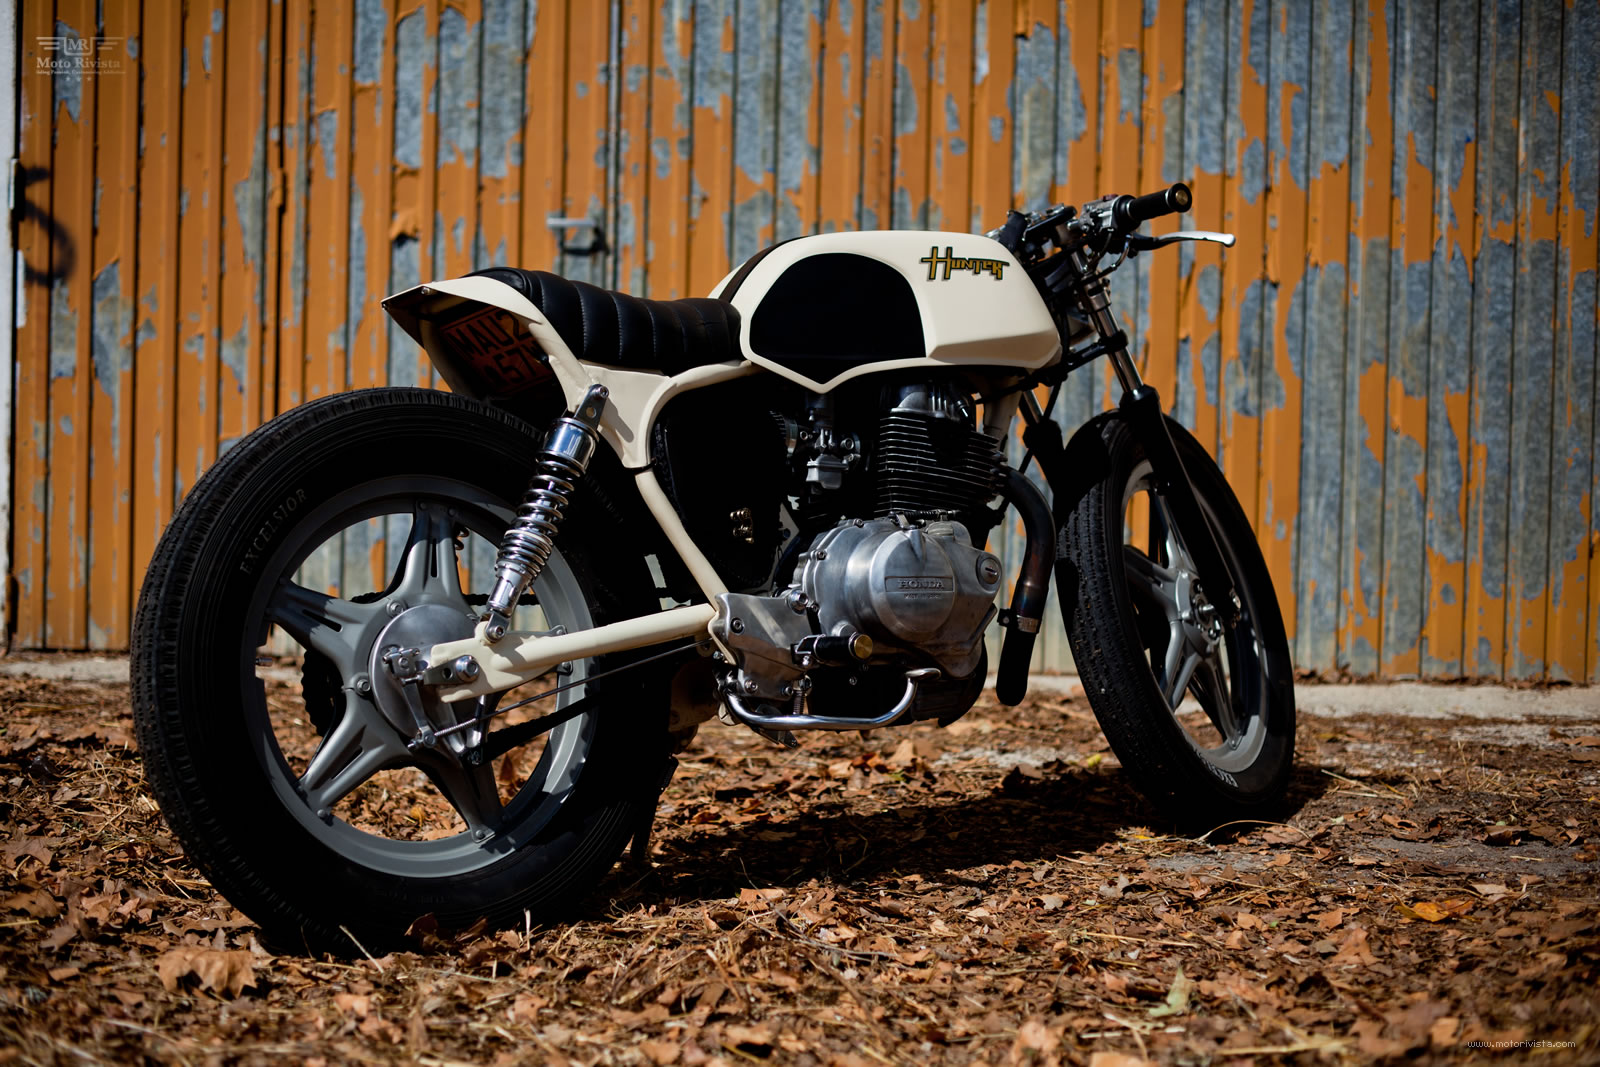 Honda CB250 Superdream by Old Empire Motorcycles